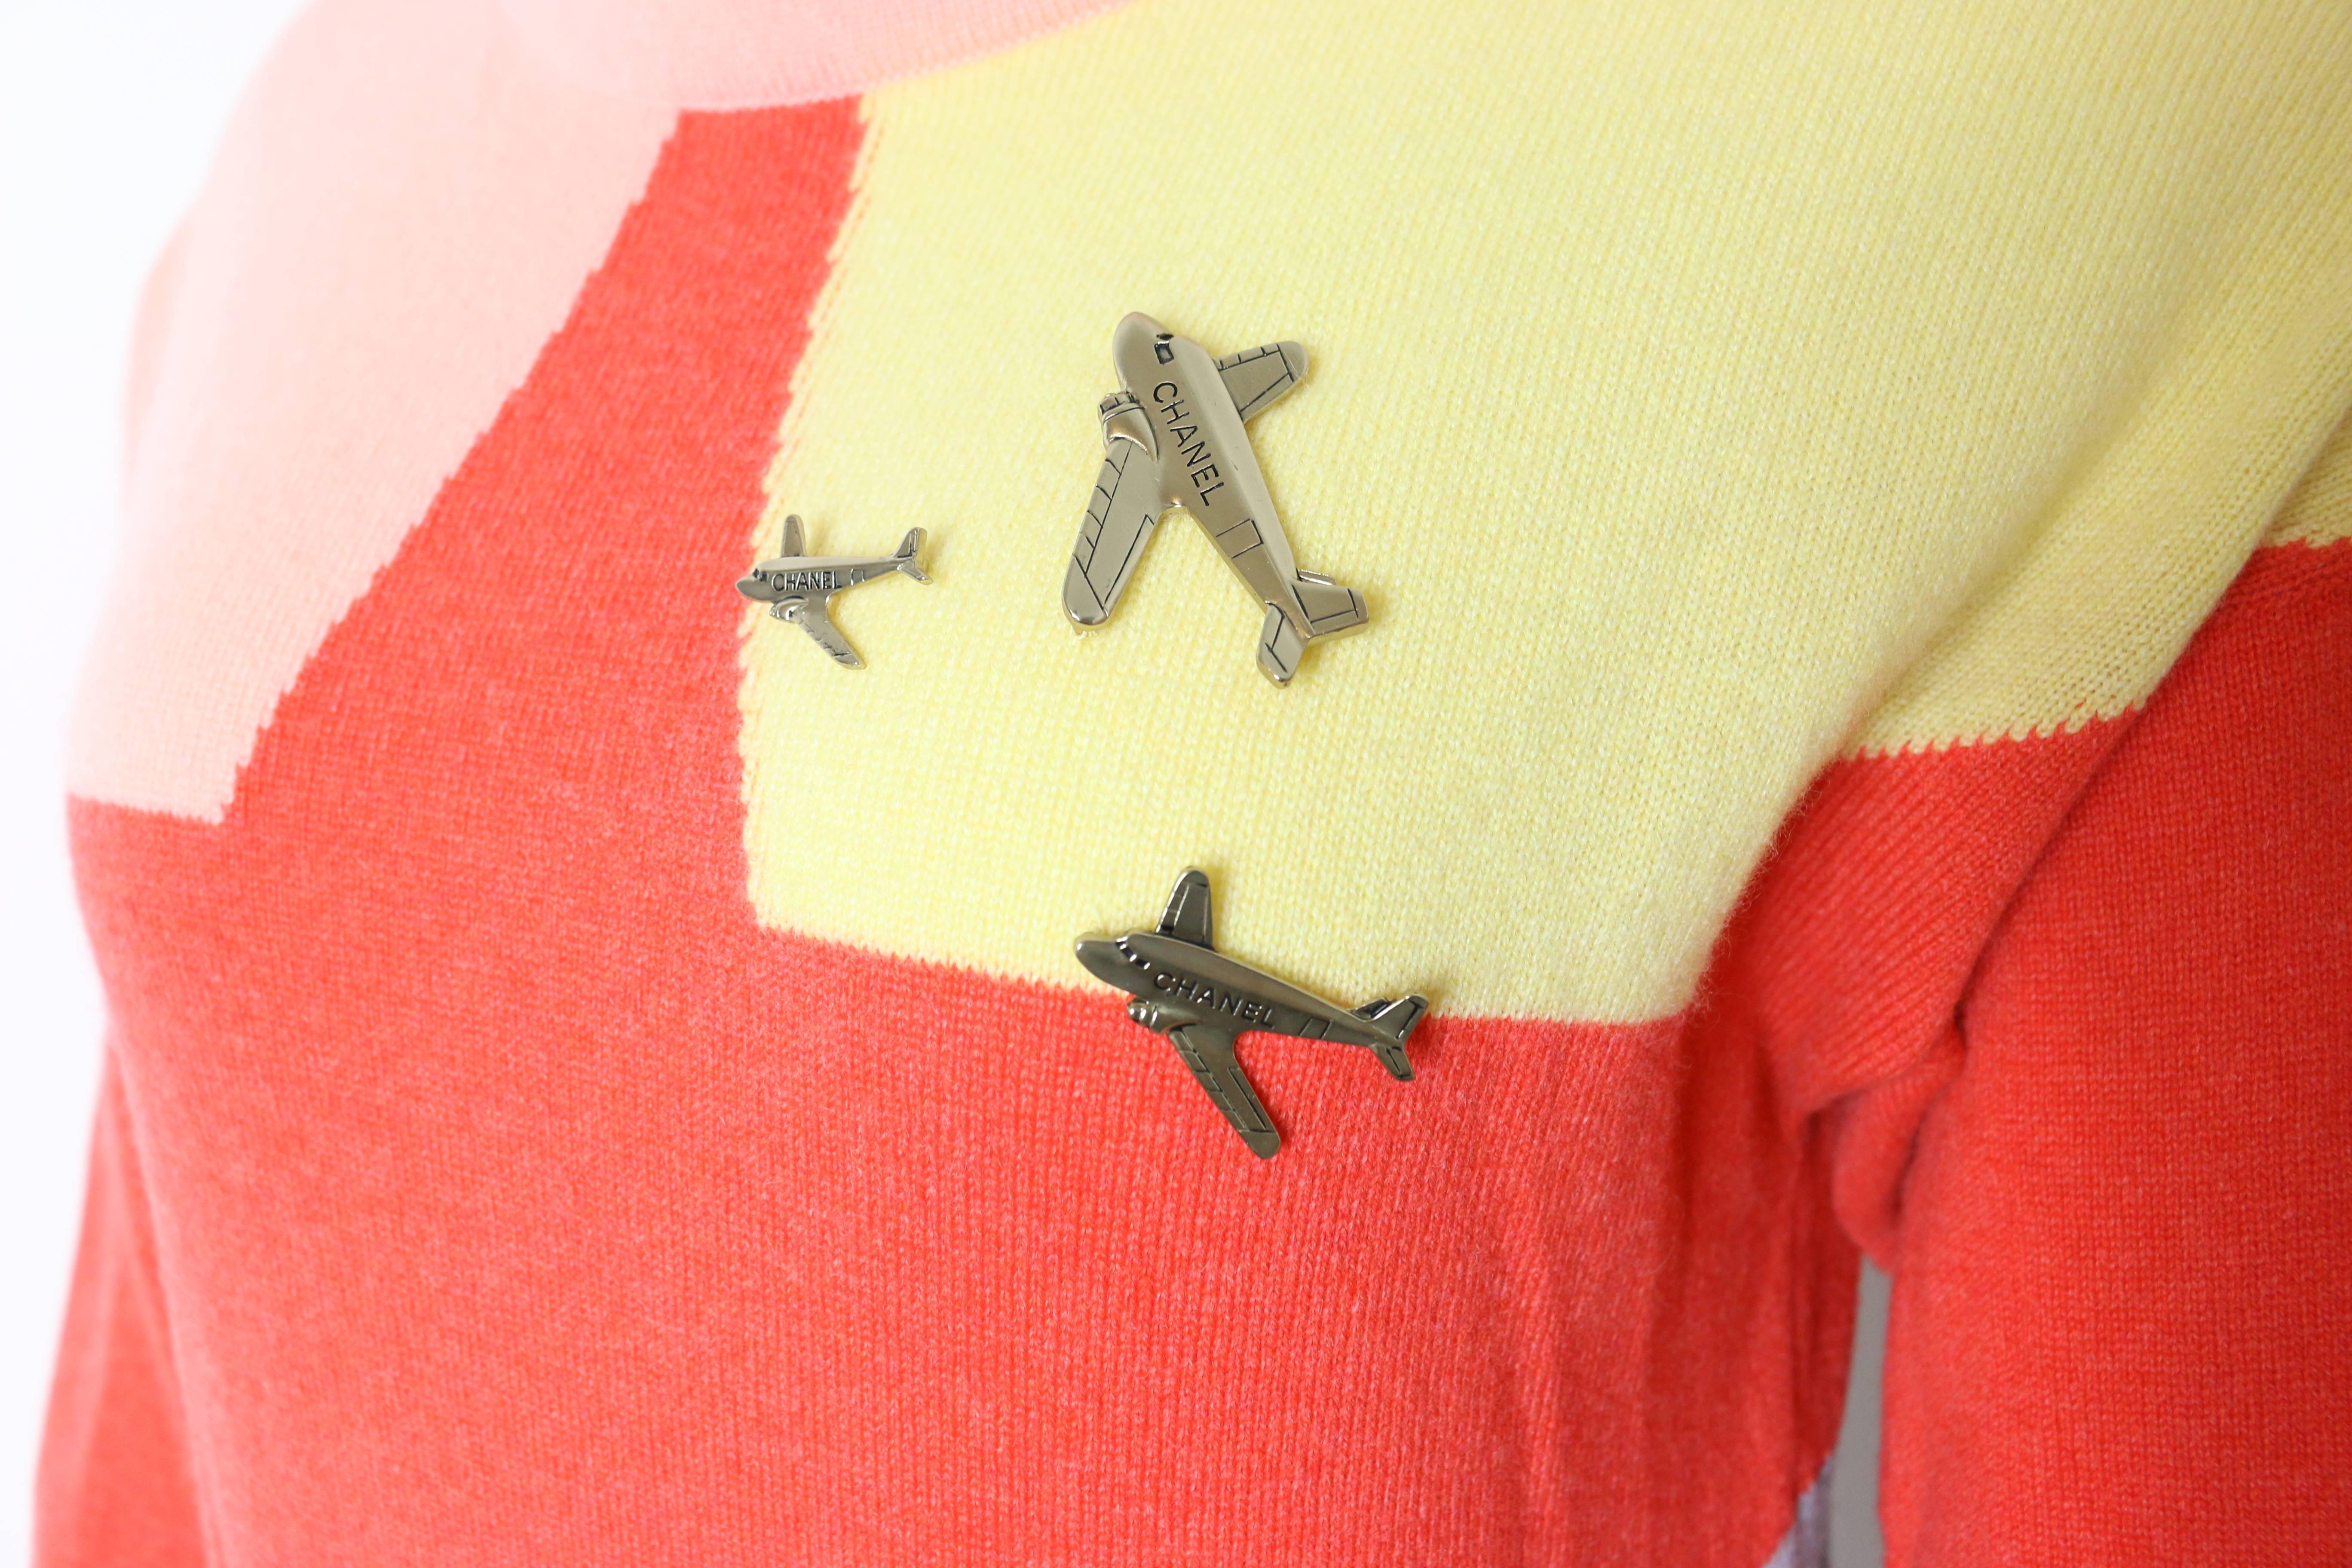 - Featuring a Retro style warm colours(carol/red/blue/yellow) palettes cashmere sweater from 2008 collection. 

- Embroidered three mini copper plane pins.

- 100% cashmere.

- Made in France. 

- Size 44. 

